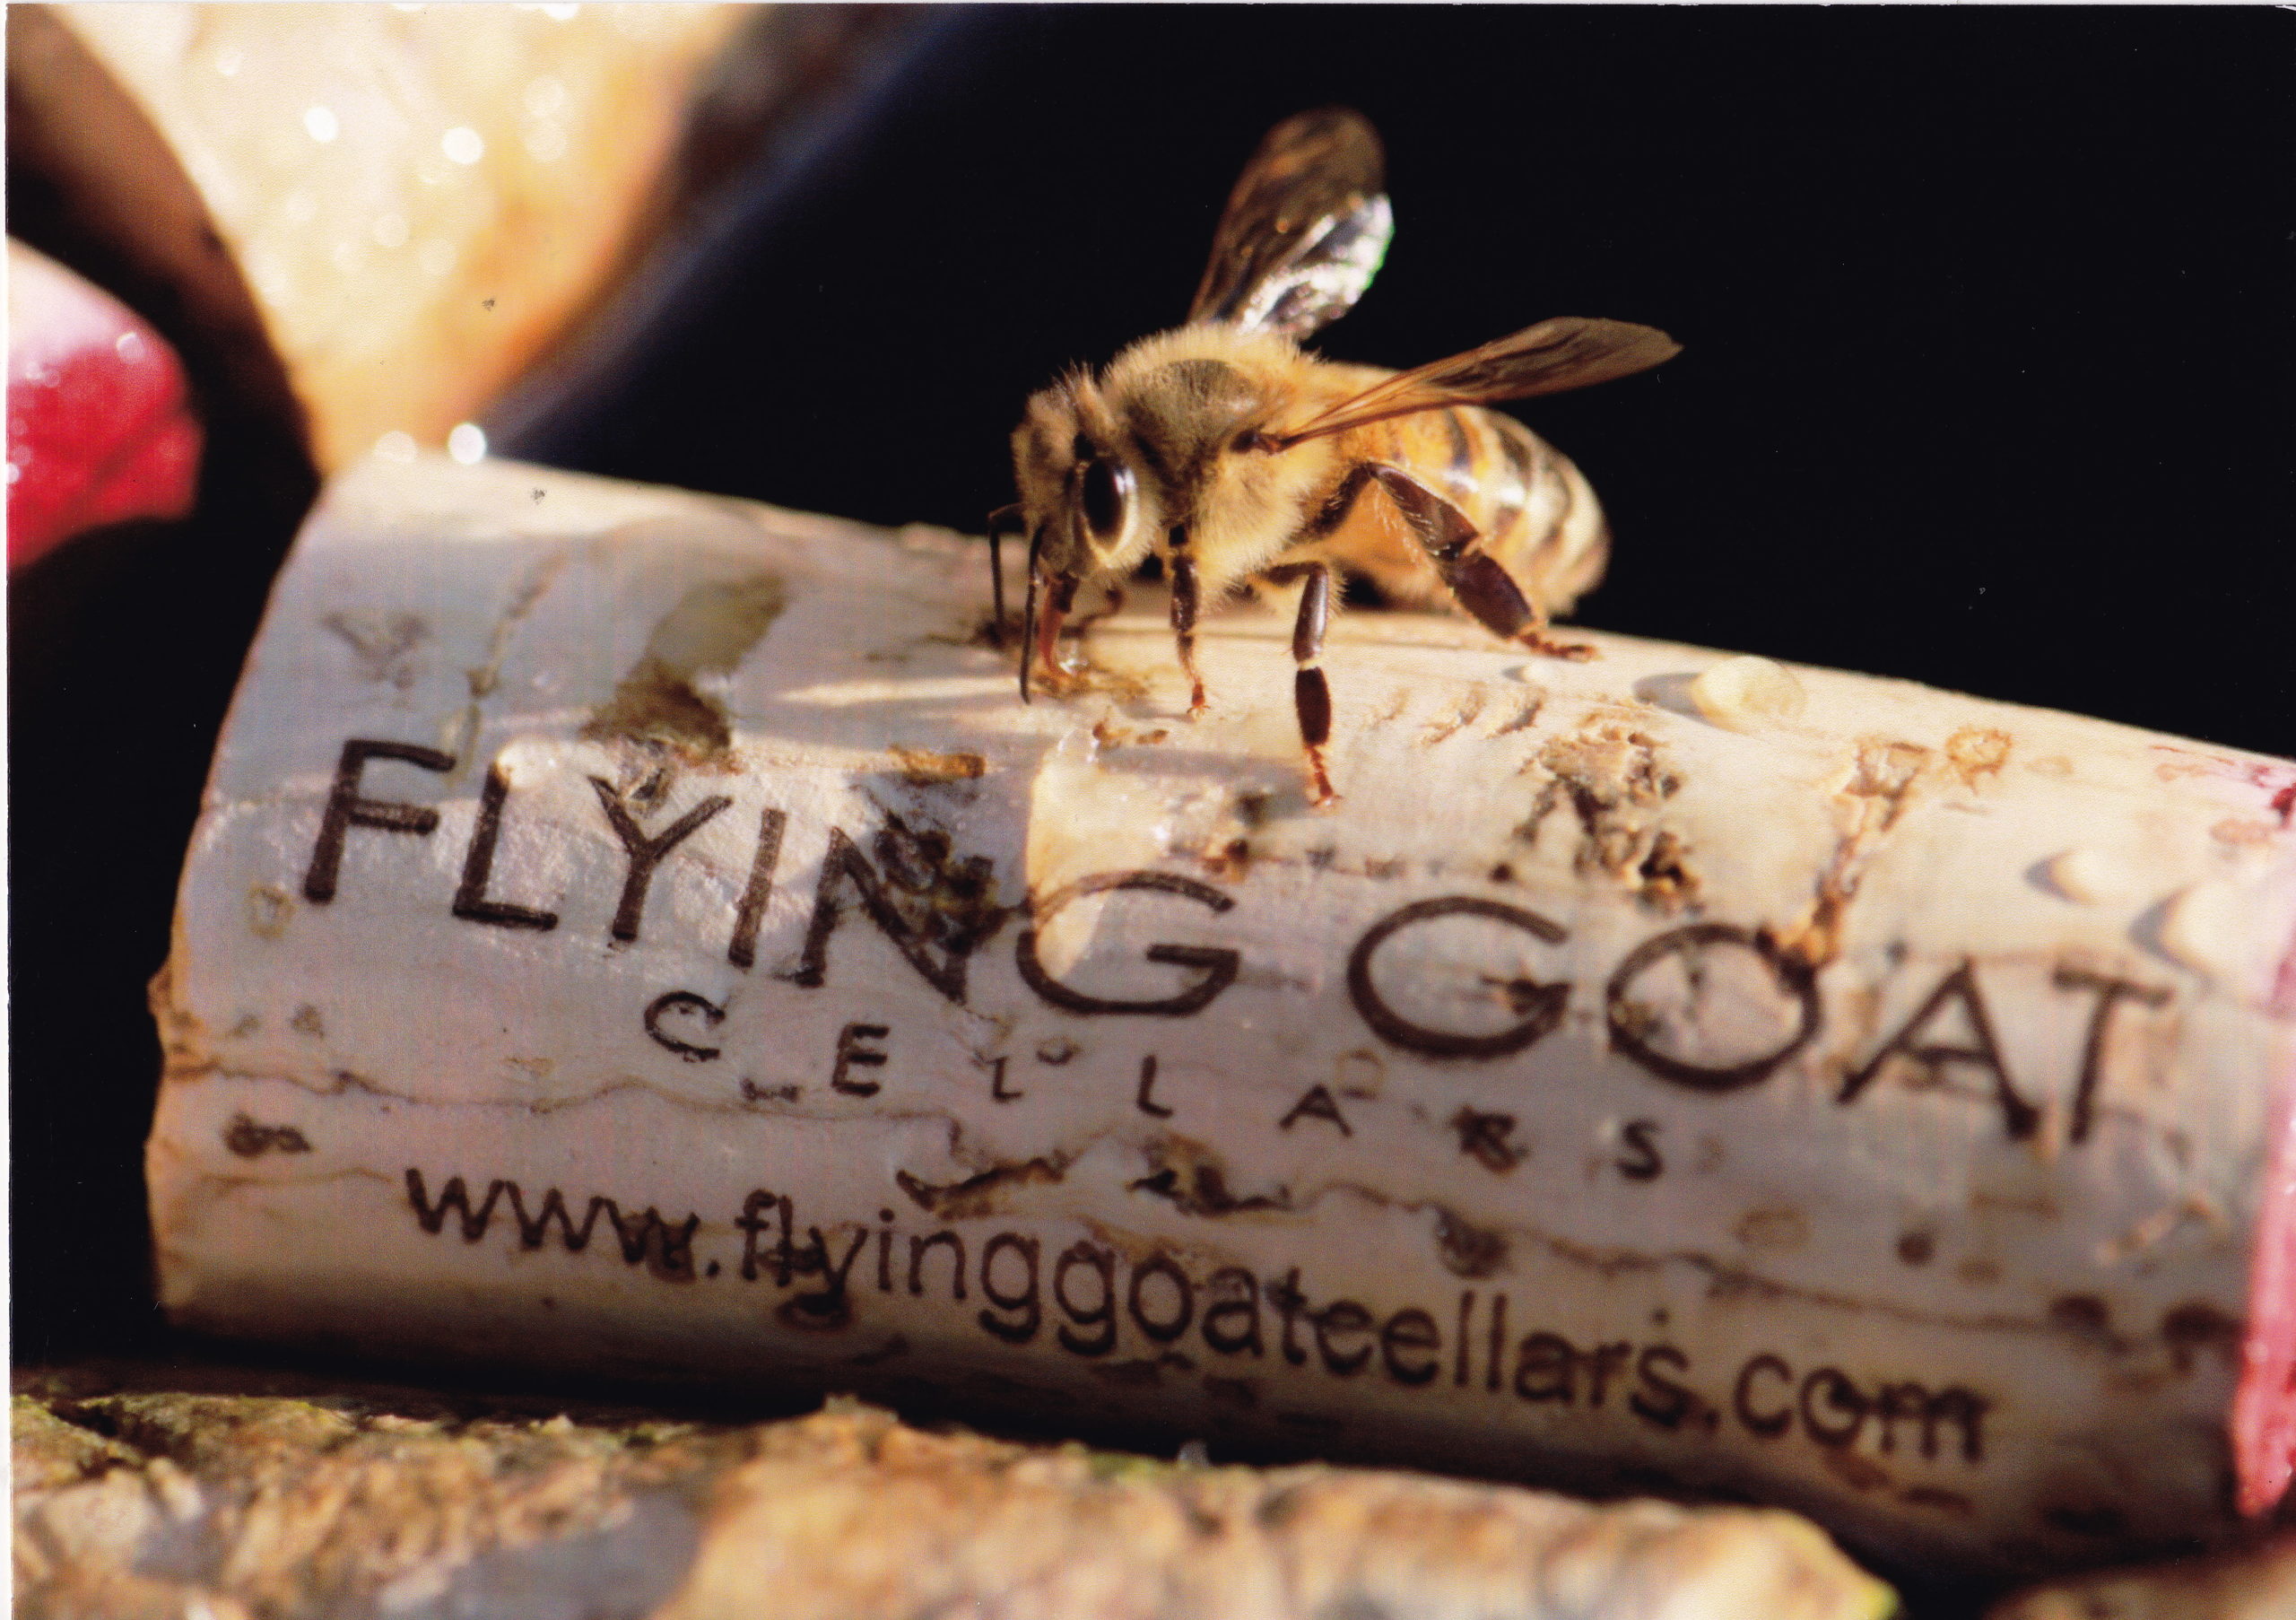 Earth Day Reception at Flying Goat Cellars